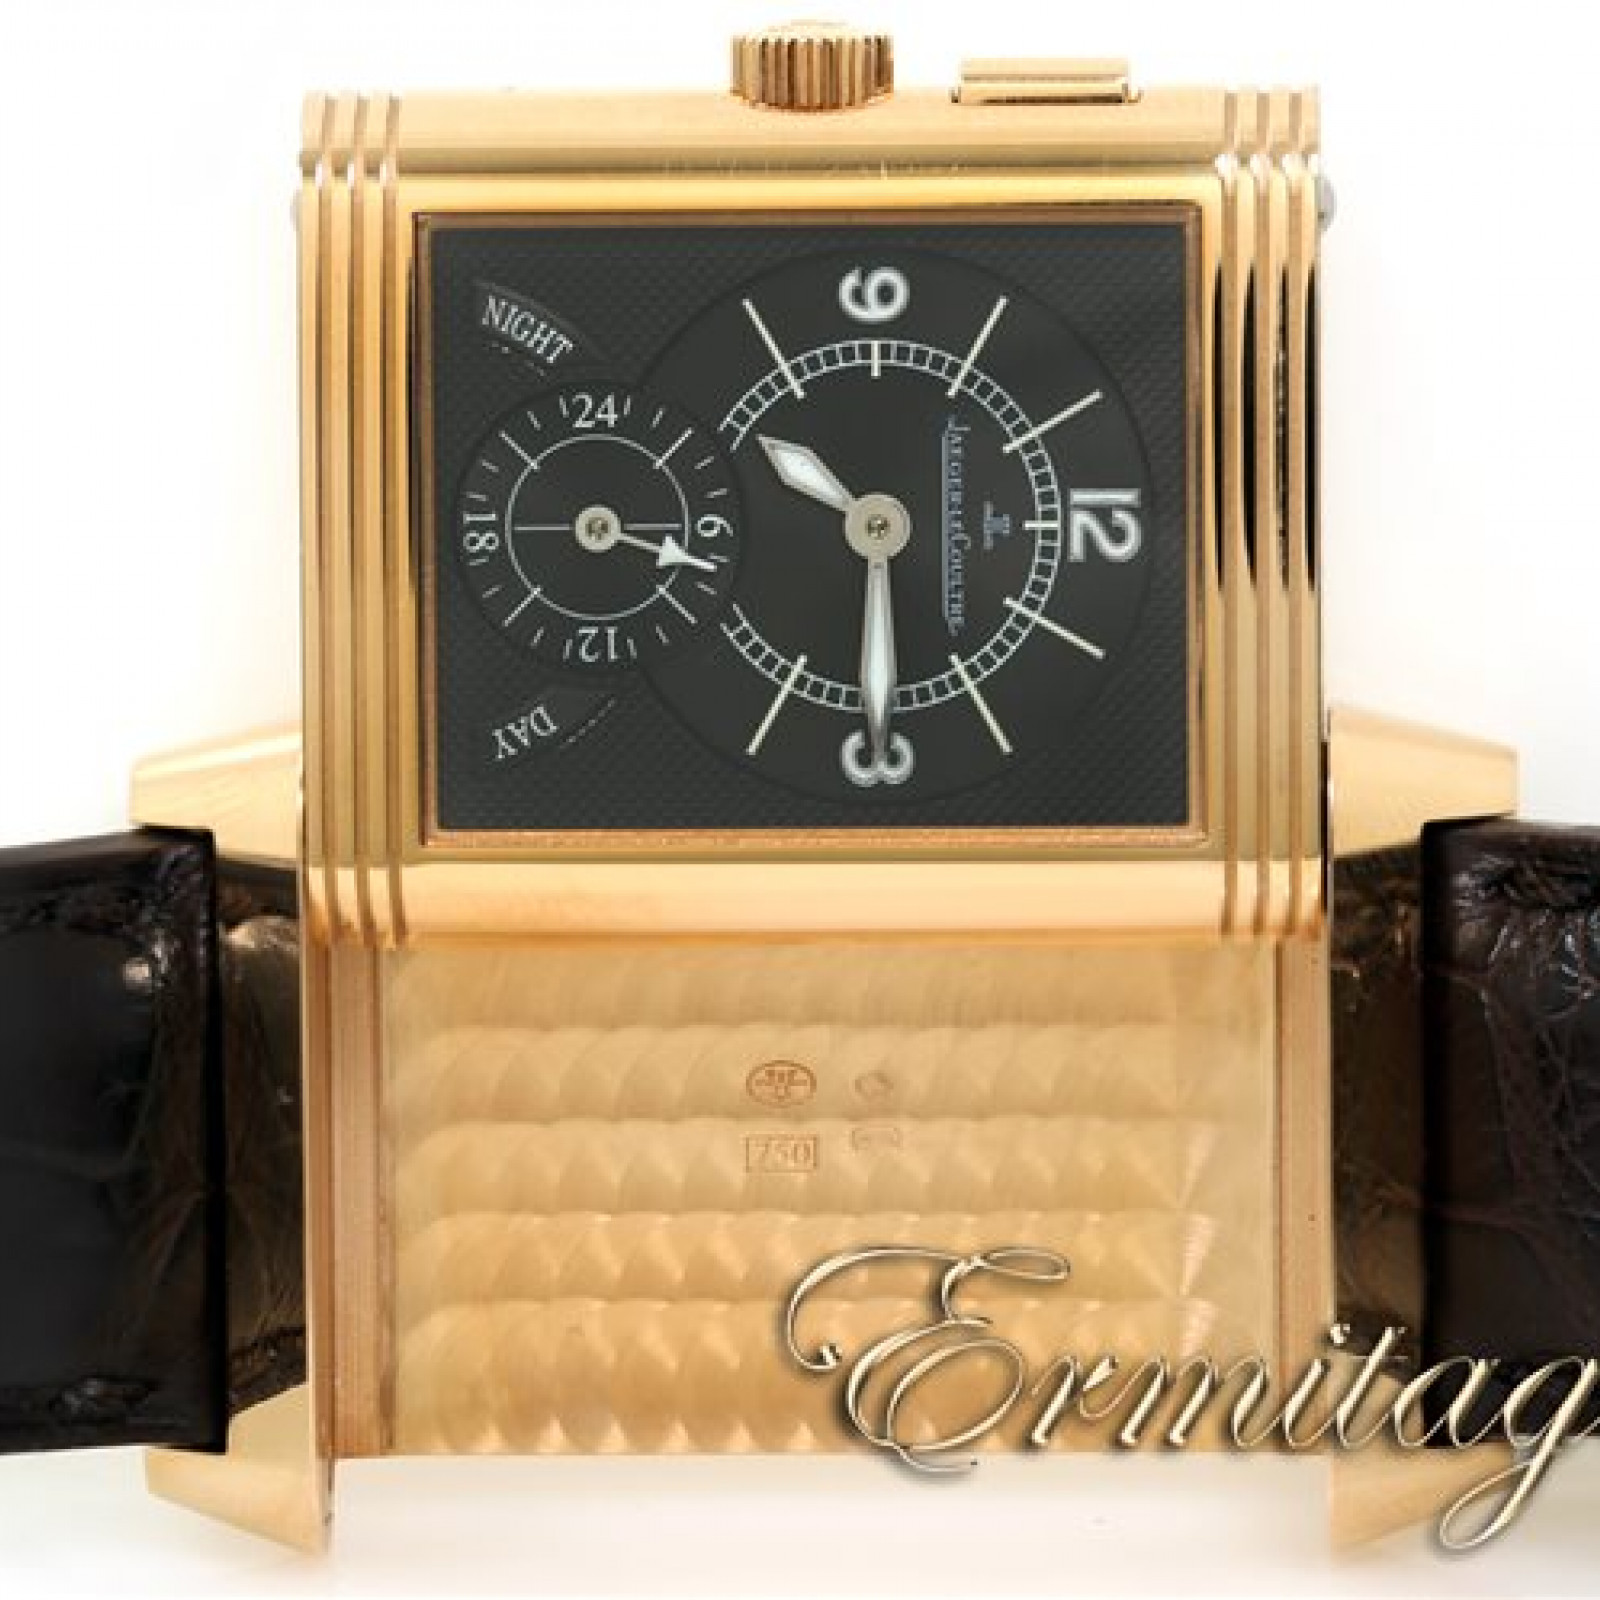 Jaeger LeCoultre Reverso Duo Q2712410 Gold